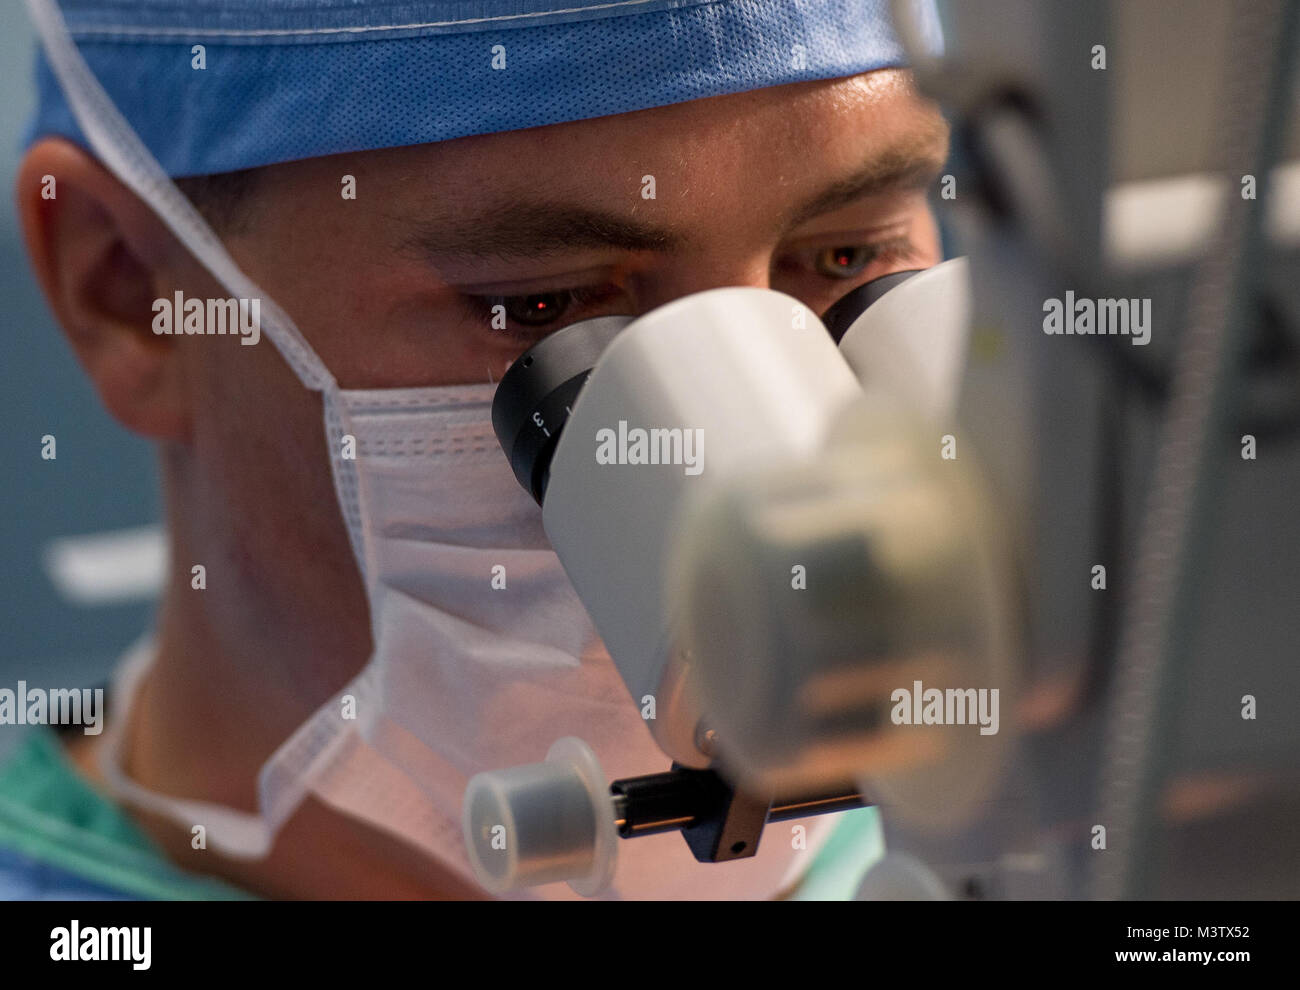 Maj. Brent Mittelstaedt, an ophthalmologist, looks through a microscope during an extracapsular cataract extraction with intraocular implant surgery at the Centro Hospitalario Luis 'Chicho' Fabrega during a medical readiness training exercise in Santiago, Panama, Feb. 6, 2017. The U.S. military medical team was in Panama to help treat individuals with cataracts that otherwise would have gone untreated. Medical readiness training exercises provide U.S. military personnel training in delivery of medical care in austere conditions, promote diplomatic relations between the U.S. and host nations in Stock Photo